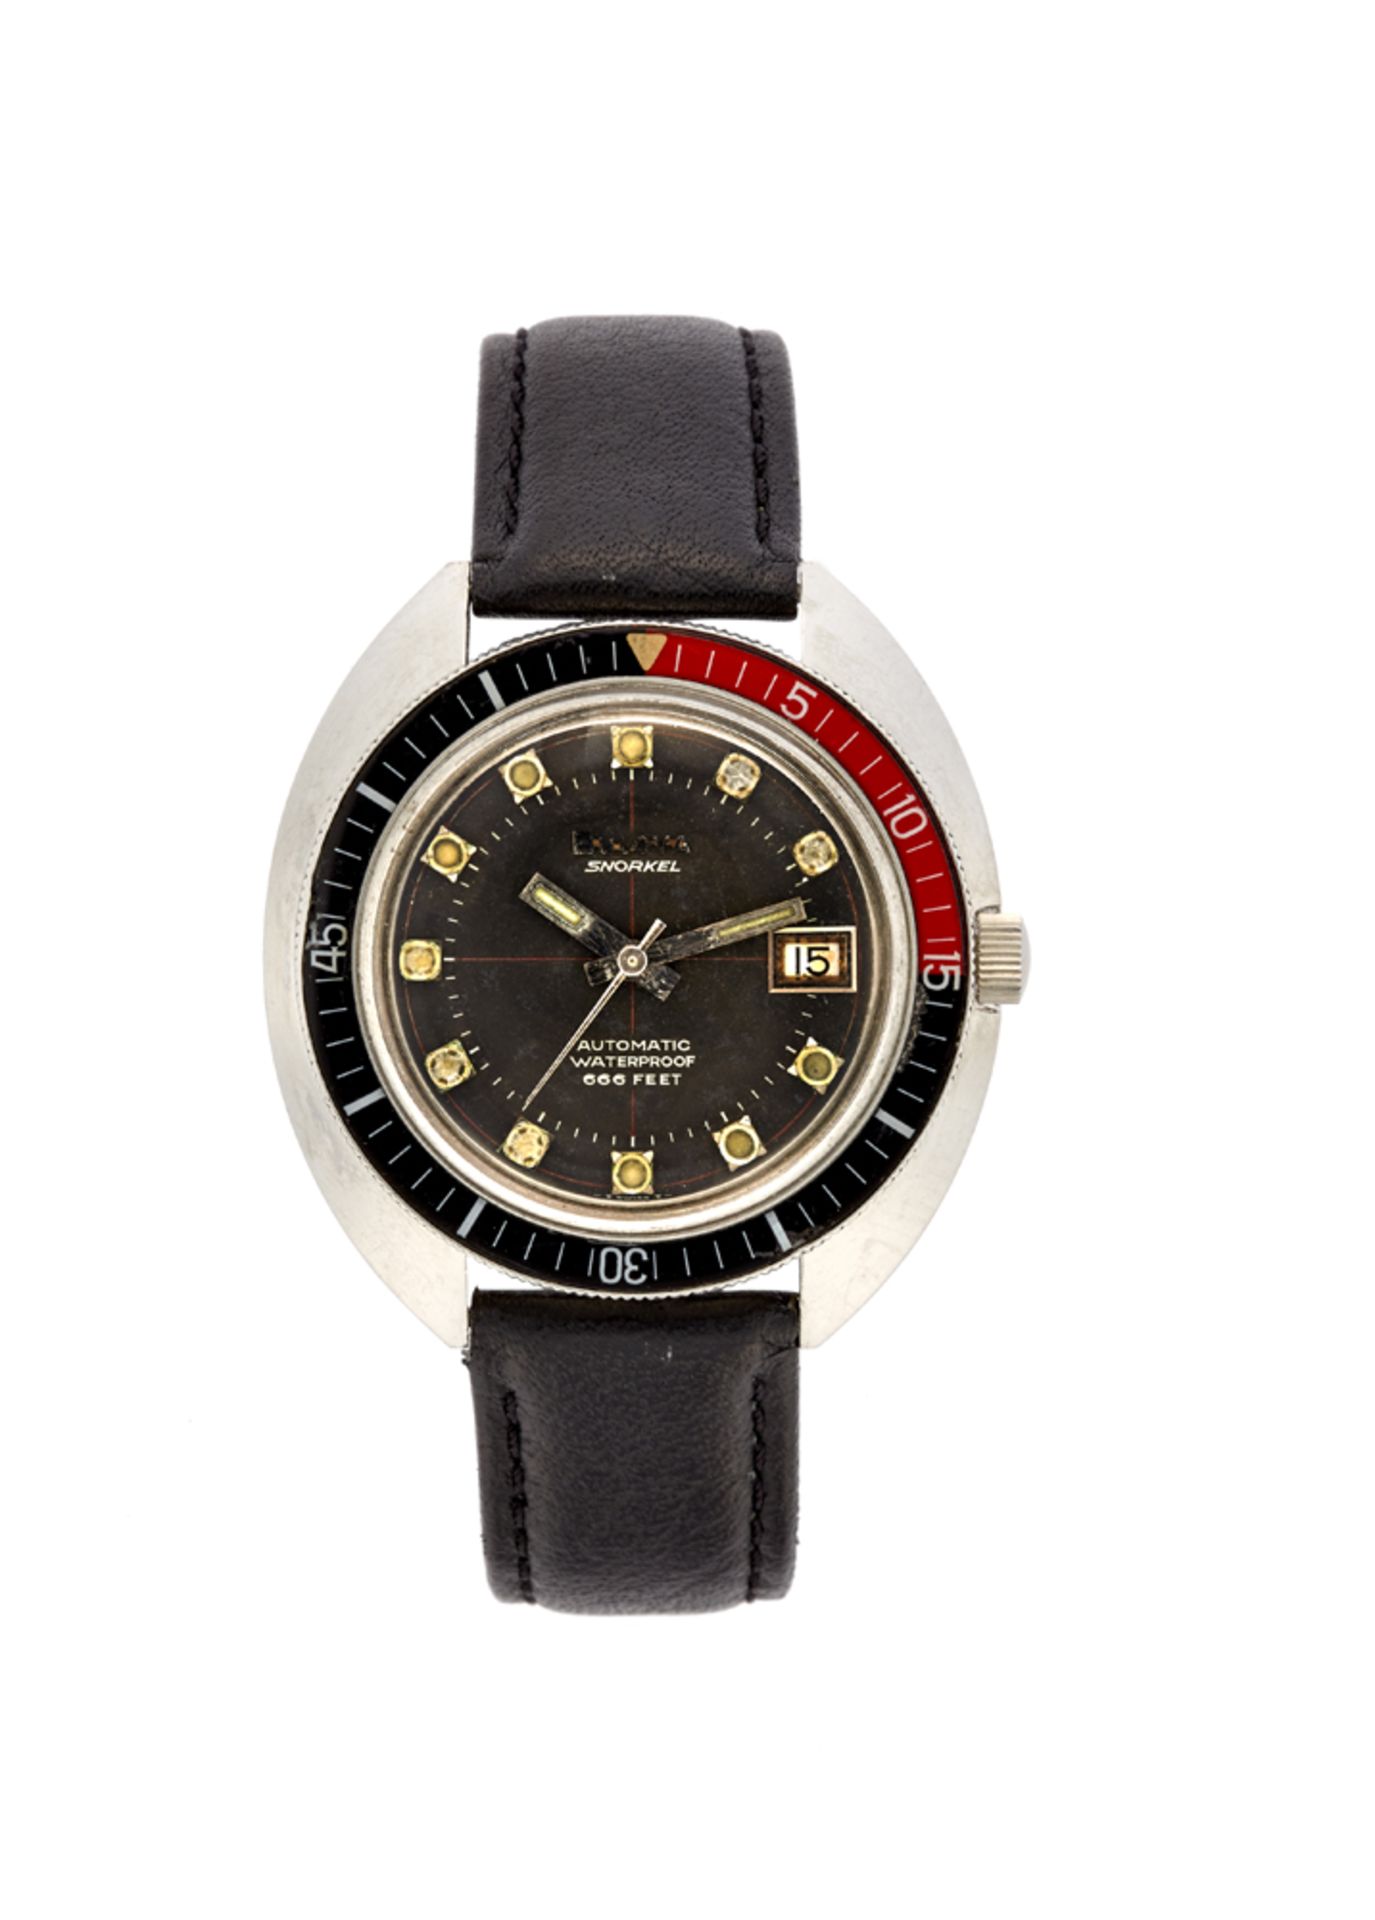 BULOVA SNORKELGent's steel wristwatch1970sDial and case signedAutomatic movementBlack dial with